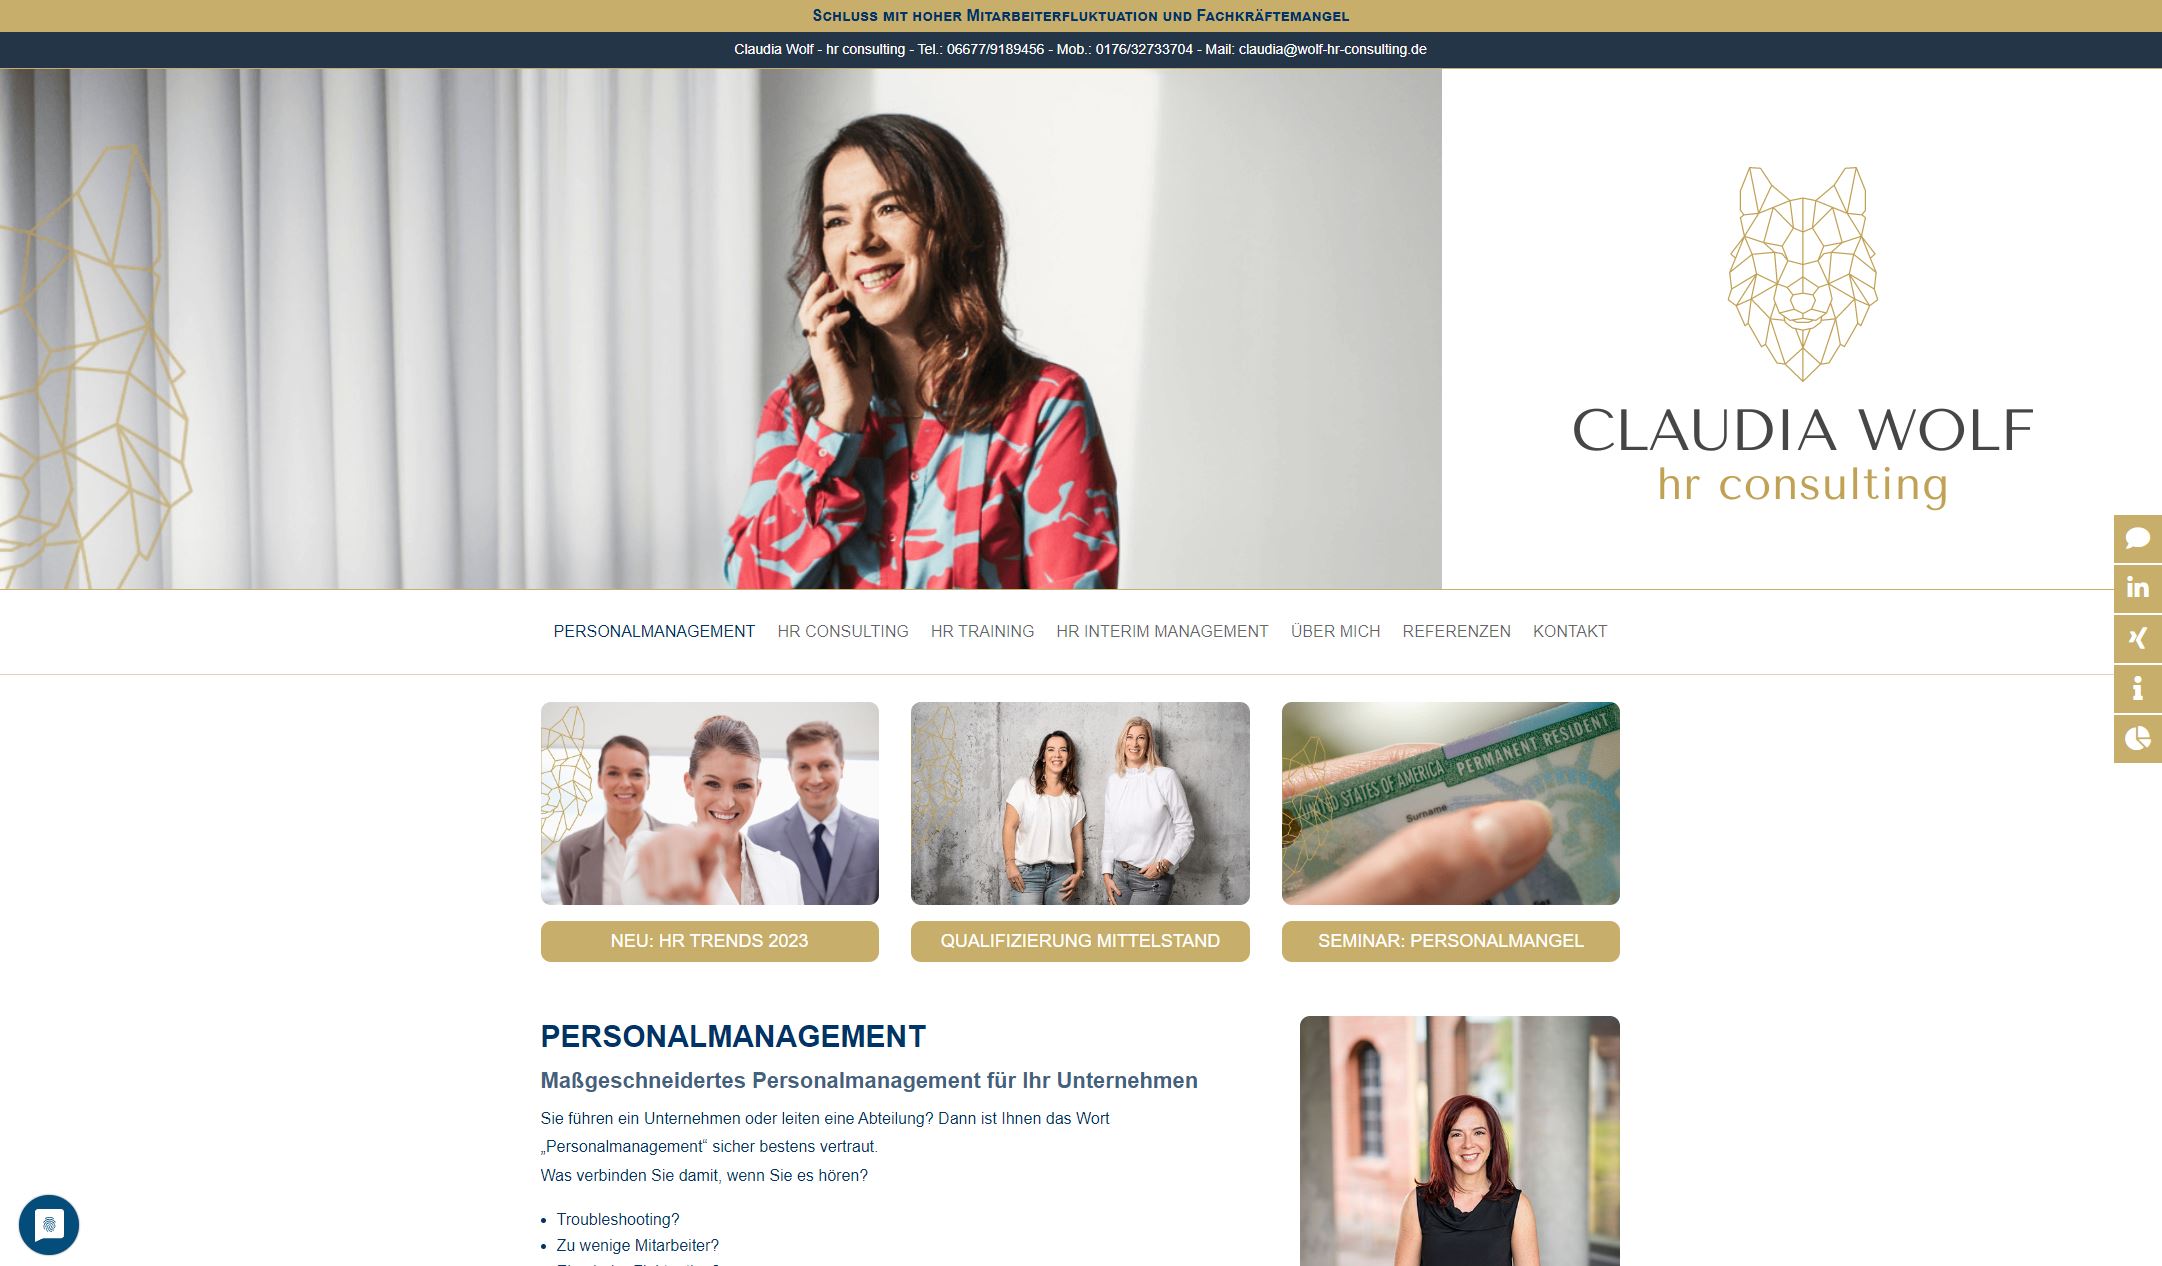 Personalmanagement Claudia Wolf - hr consulting